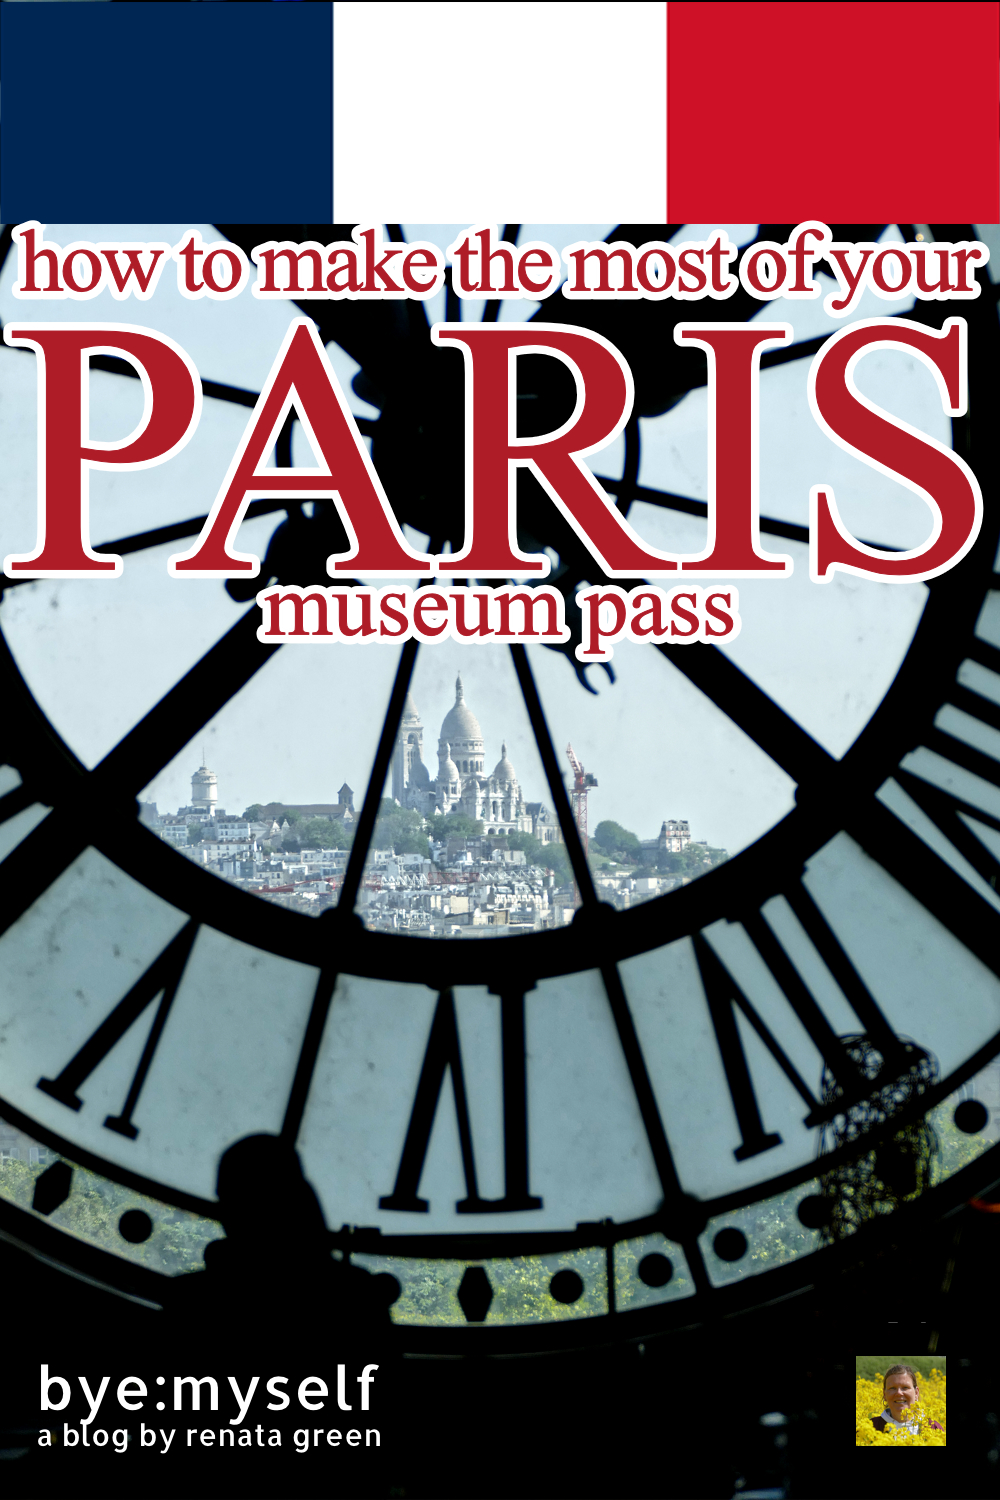 Paris for Culture Vultures: With the Paris Museum Pass, not only can you visit 50 museums and monuments for free, you will also save lots of time since it allows you to just skip the lines. In this post, I'm introducing you to this magic key that opens the doors to the most amazing museums. #paris #france #museum #culture #culturetrip #citytrip #citybreak #europe #solotrip #byemyself.